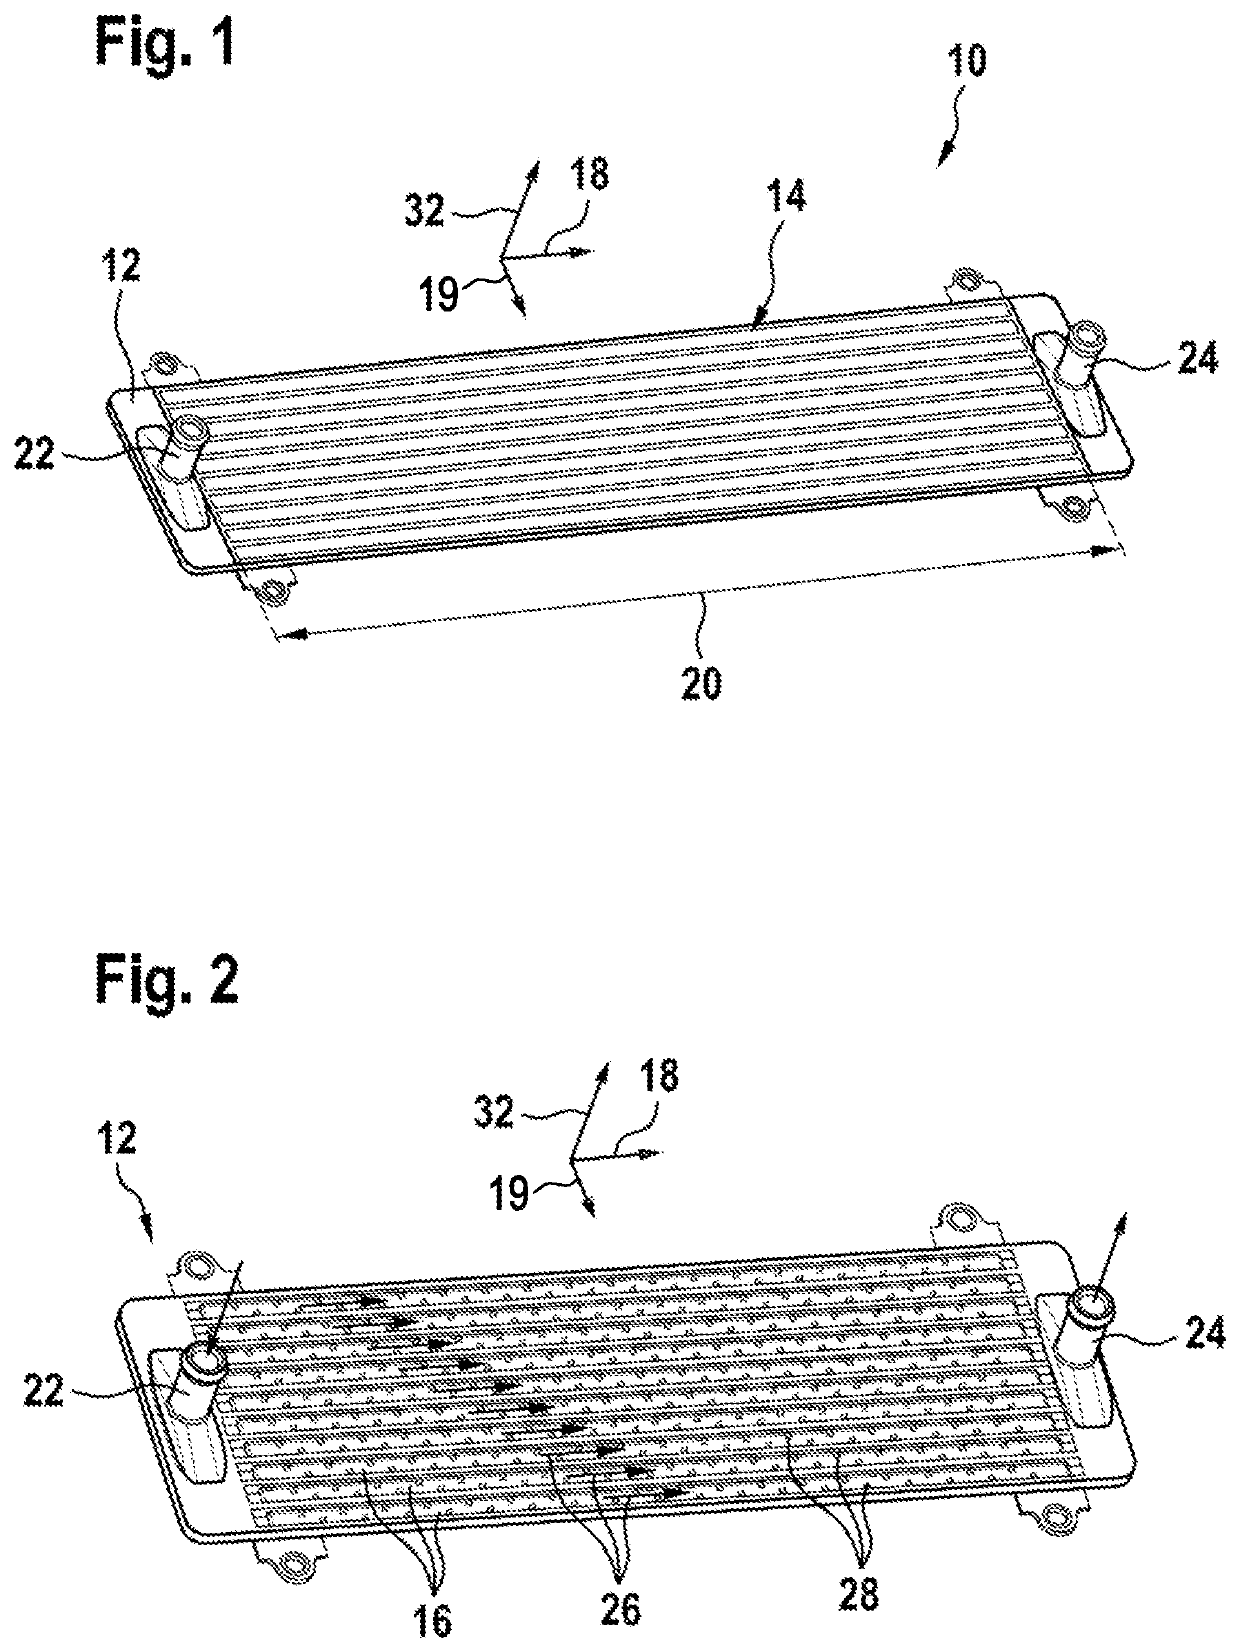 Cooling plate for the temperature control of at least one battery cell and a battery system